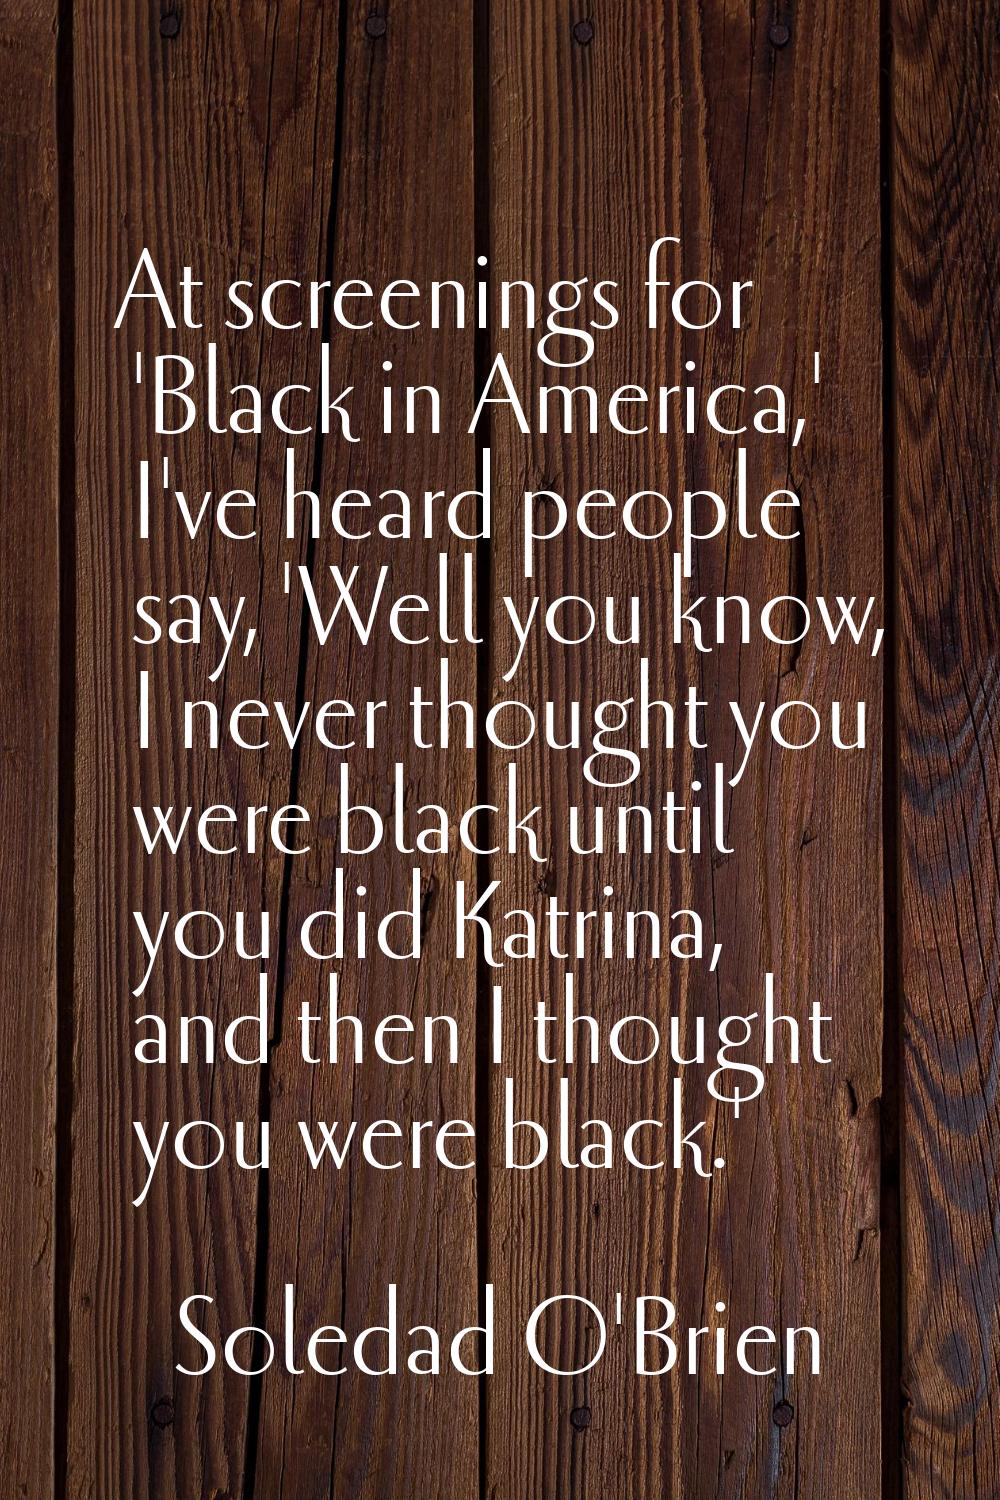 At screenings for 'Black in America,' I've heard people say, 'Well you know, I never thought you we